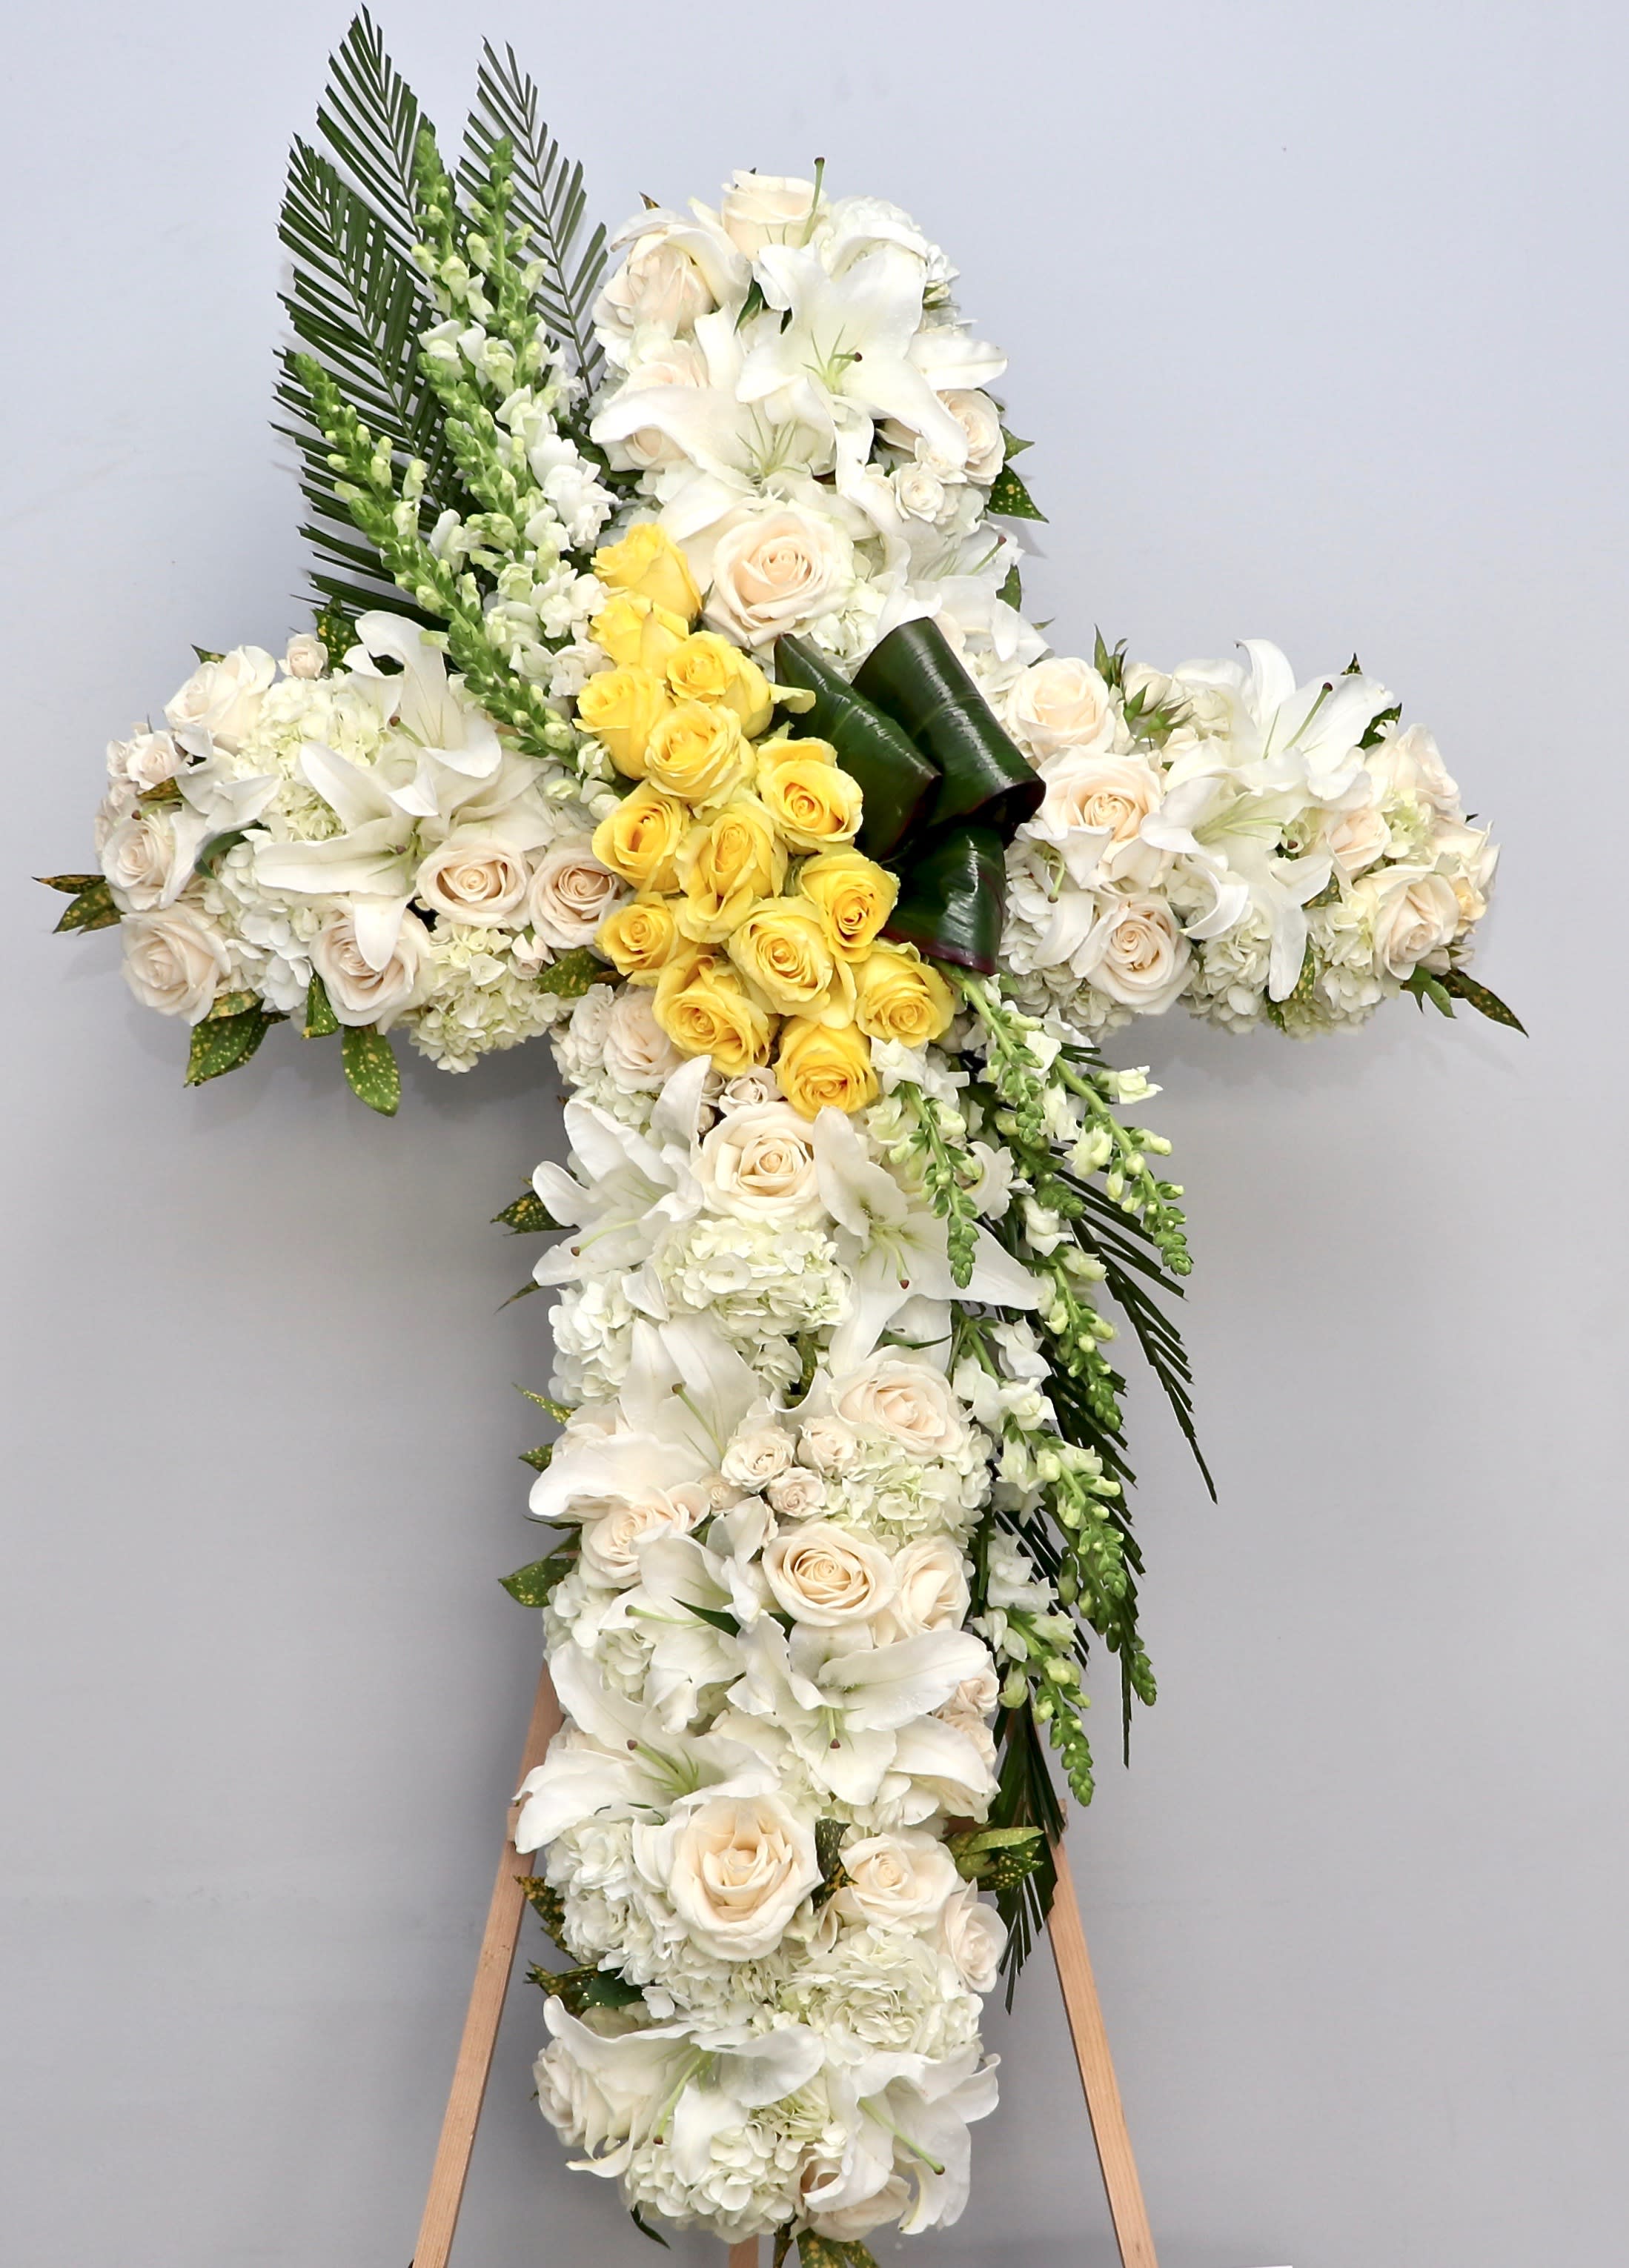 Heart of Gold Cross  - This sympathy cross includes a center of yellow roses, hydrangeas, lilies, and seasonal greens.   We include easel, printed banner and delivery (some fees may apply).  Standard size is 30'', deluxe is 36'', and premium is 42''. 